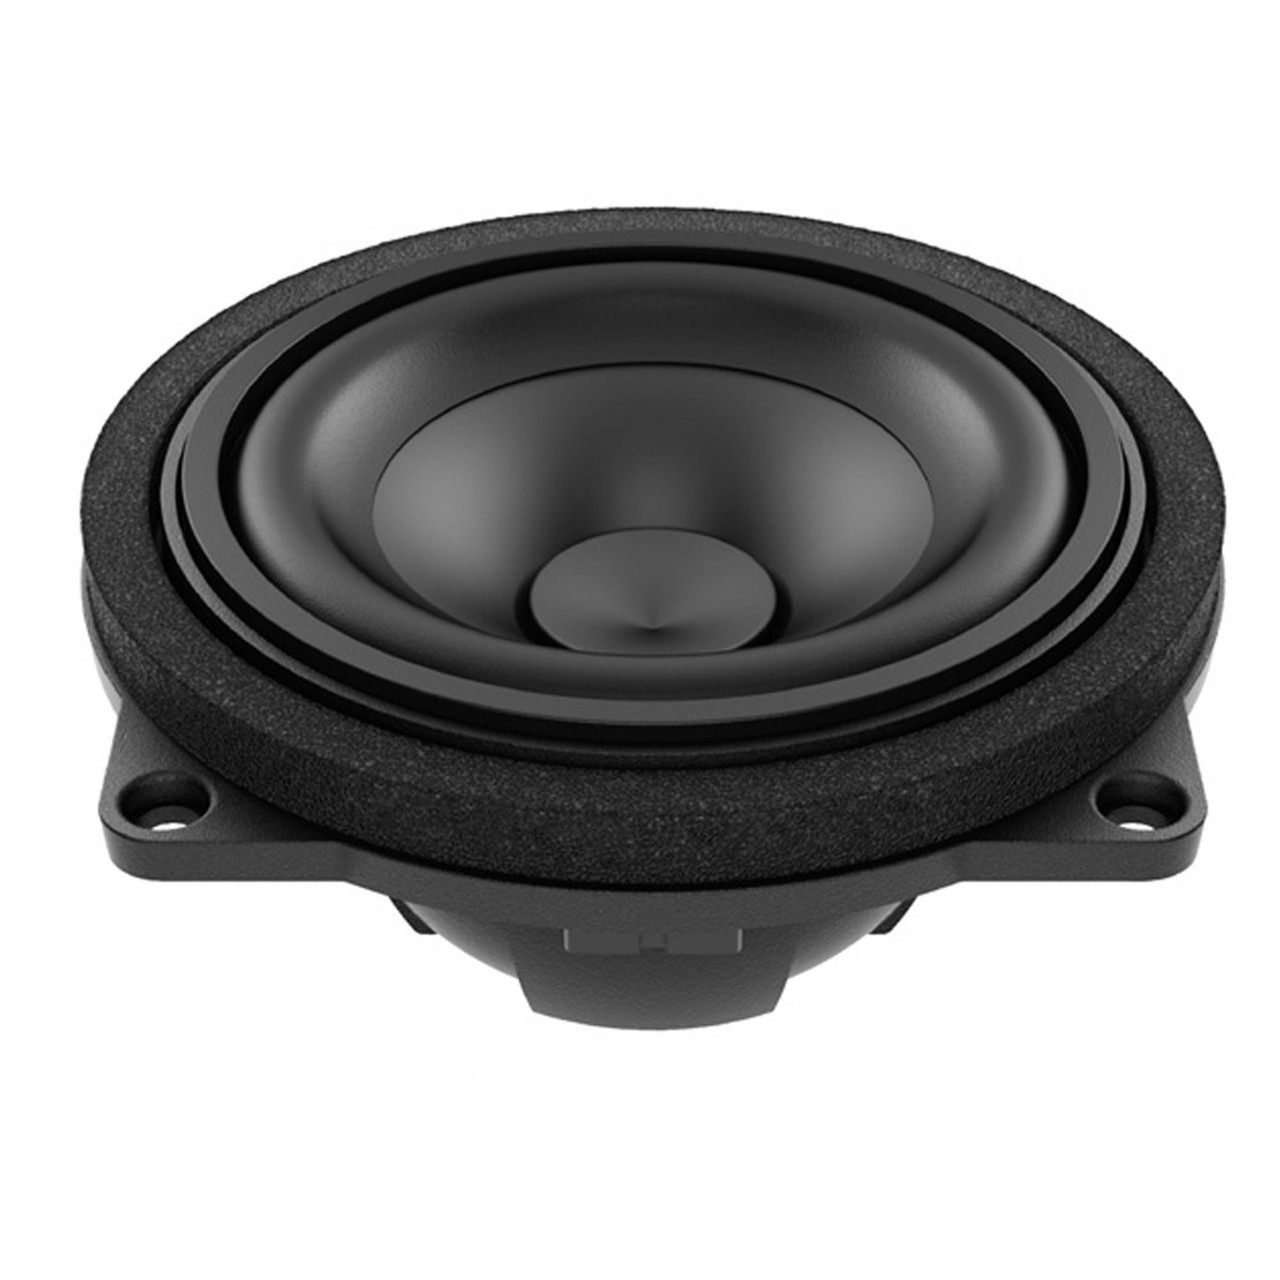 Deens zaterdag klant Audison Front Speakers, and Subwoofers Bundle Compatible With 17-21 BMW 5  Series Limo/Sedan G30 Base Sound System - Creative Audio